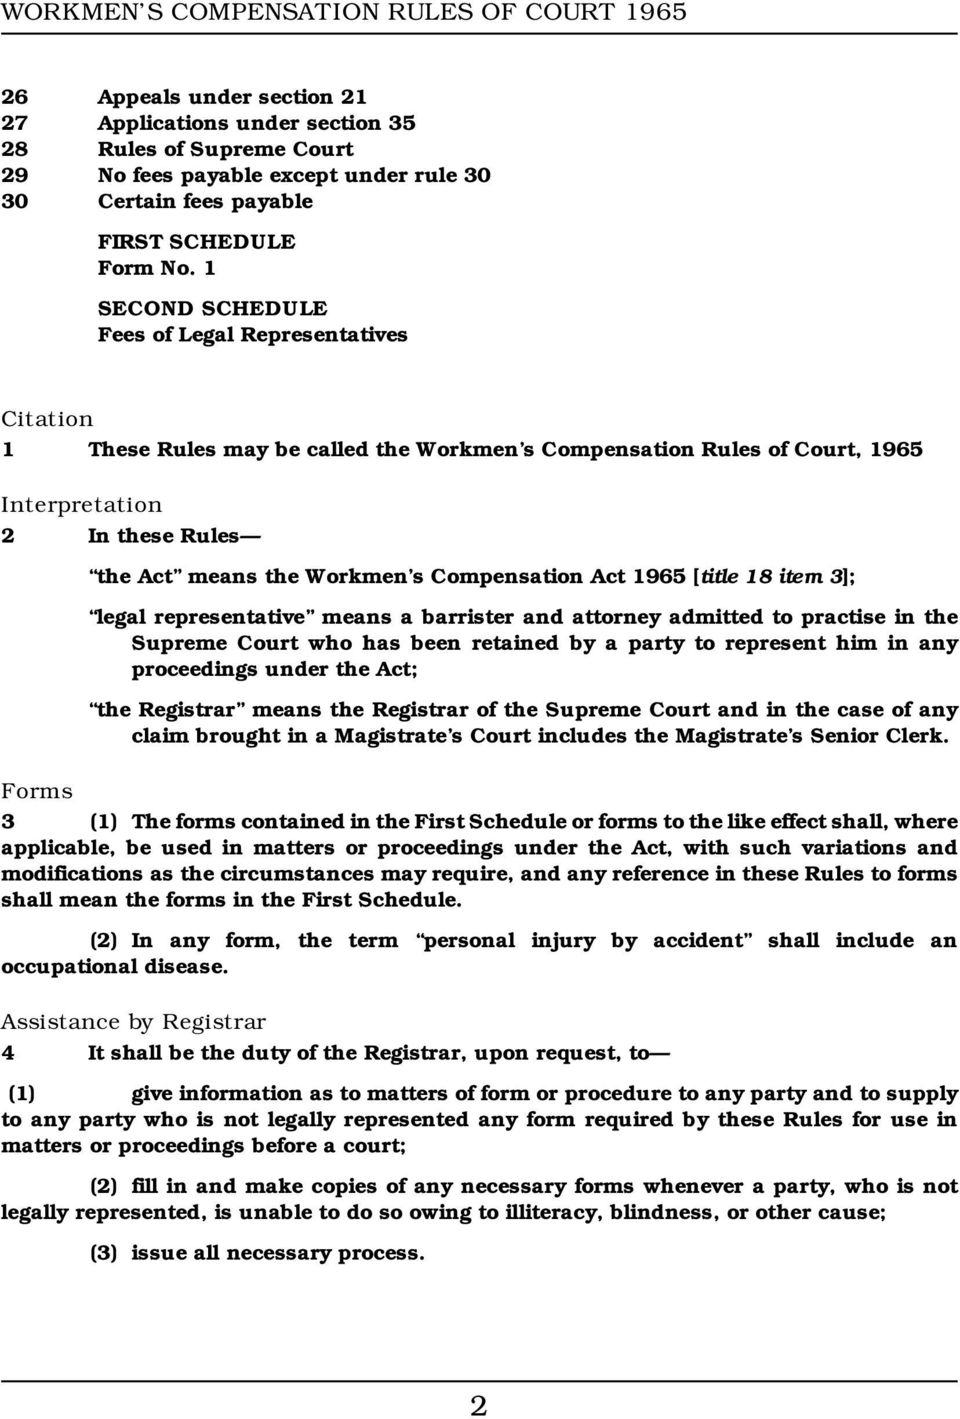 Compensation Act 1965 [title 18 item 3]; legal representative means a barrister attorney admitted to practise in the Supreme Court who has been retained by a party to represent him in any proceedings